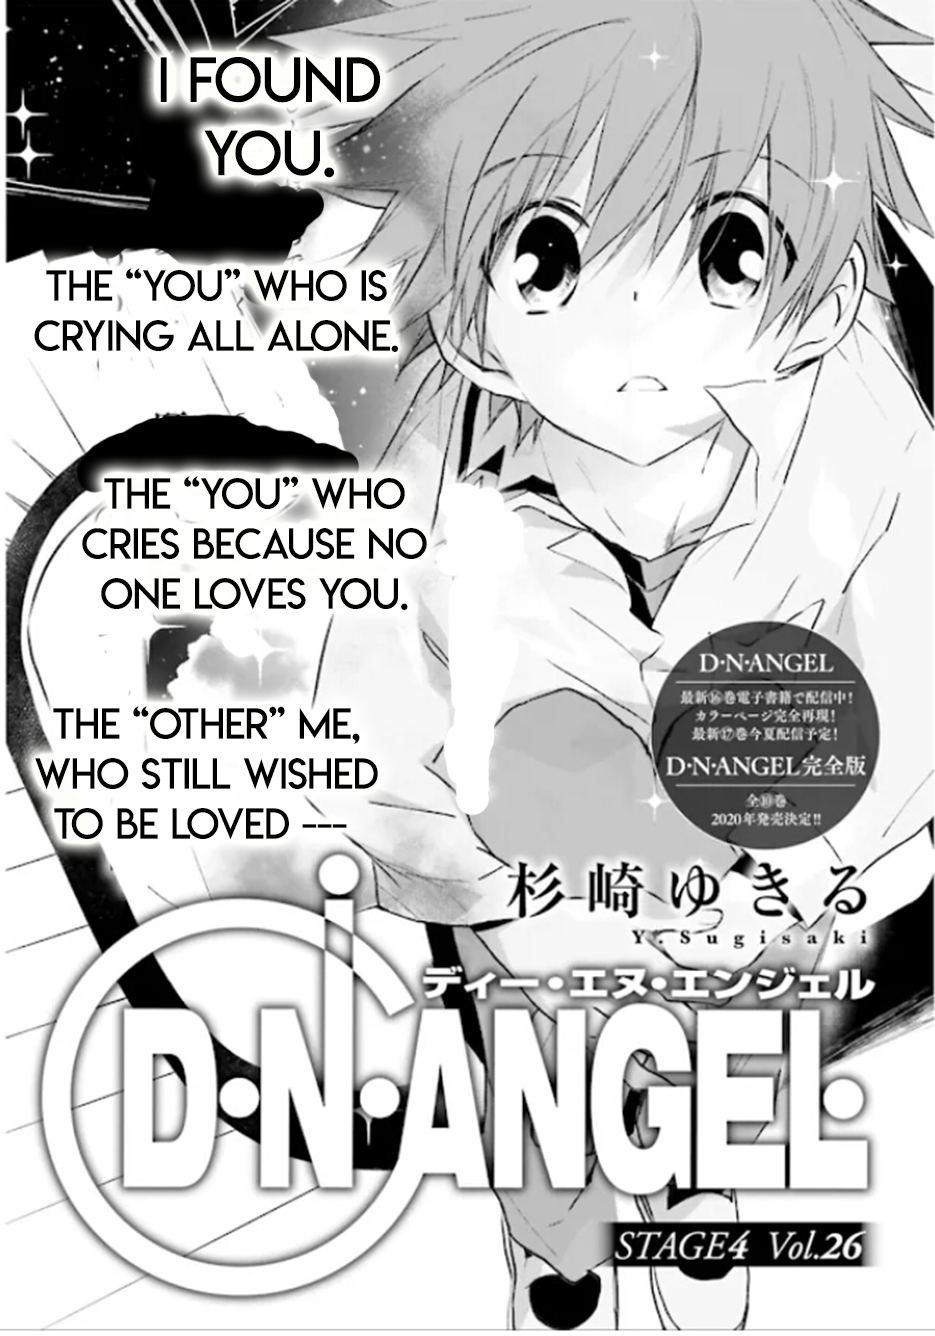 D•n•angel• (2018) Volume 26 Chapter 85 : Stage 4 Volume 26 - Picture 1